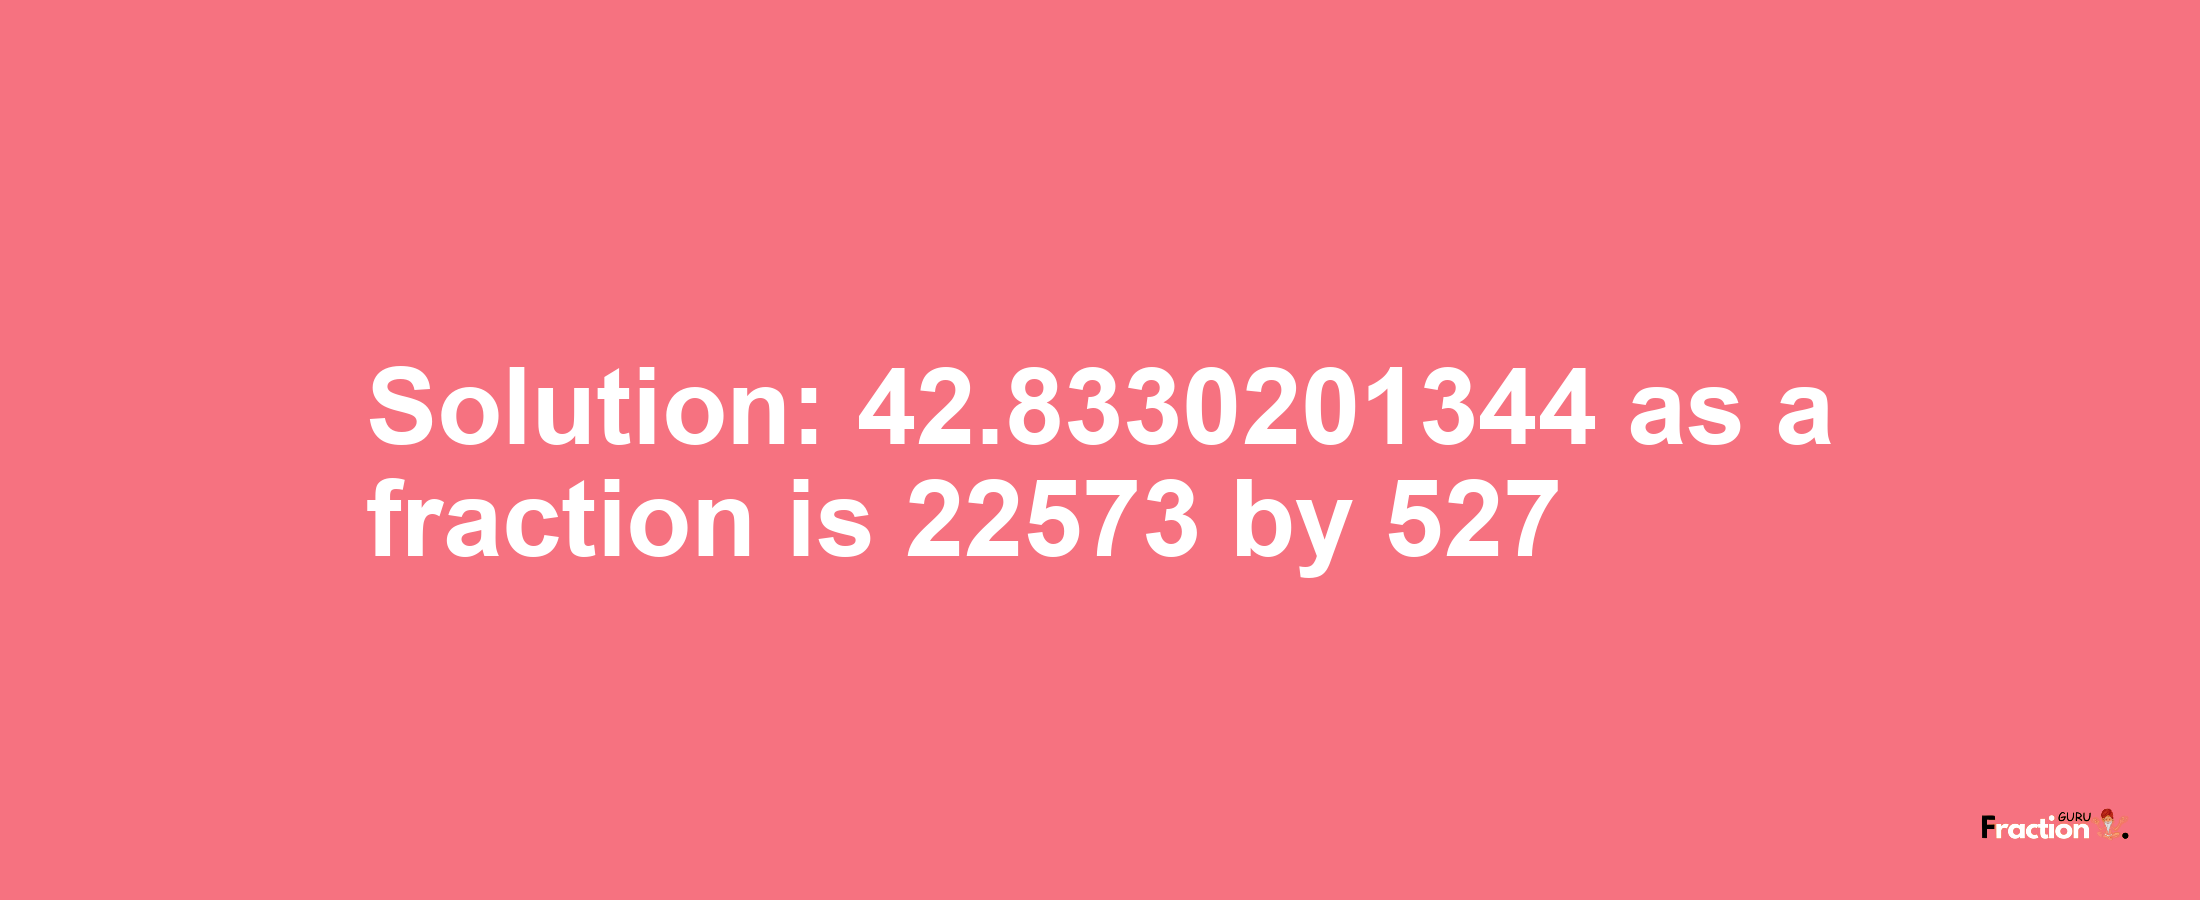 Solution:42.8330201344 as a fraction is 22573/527